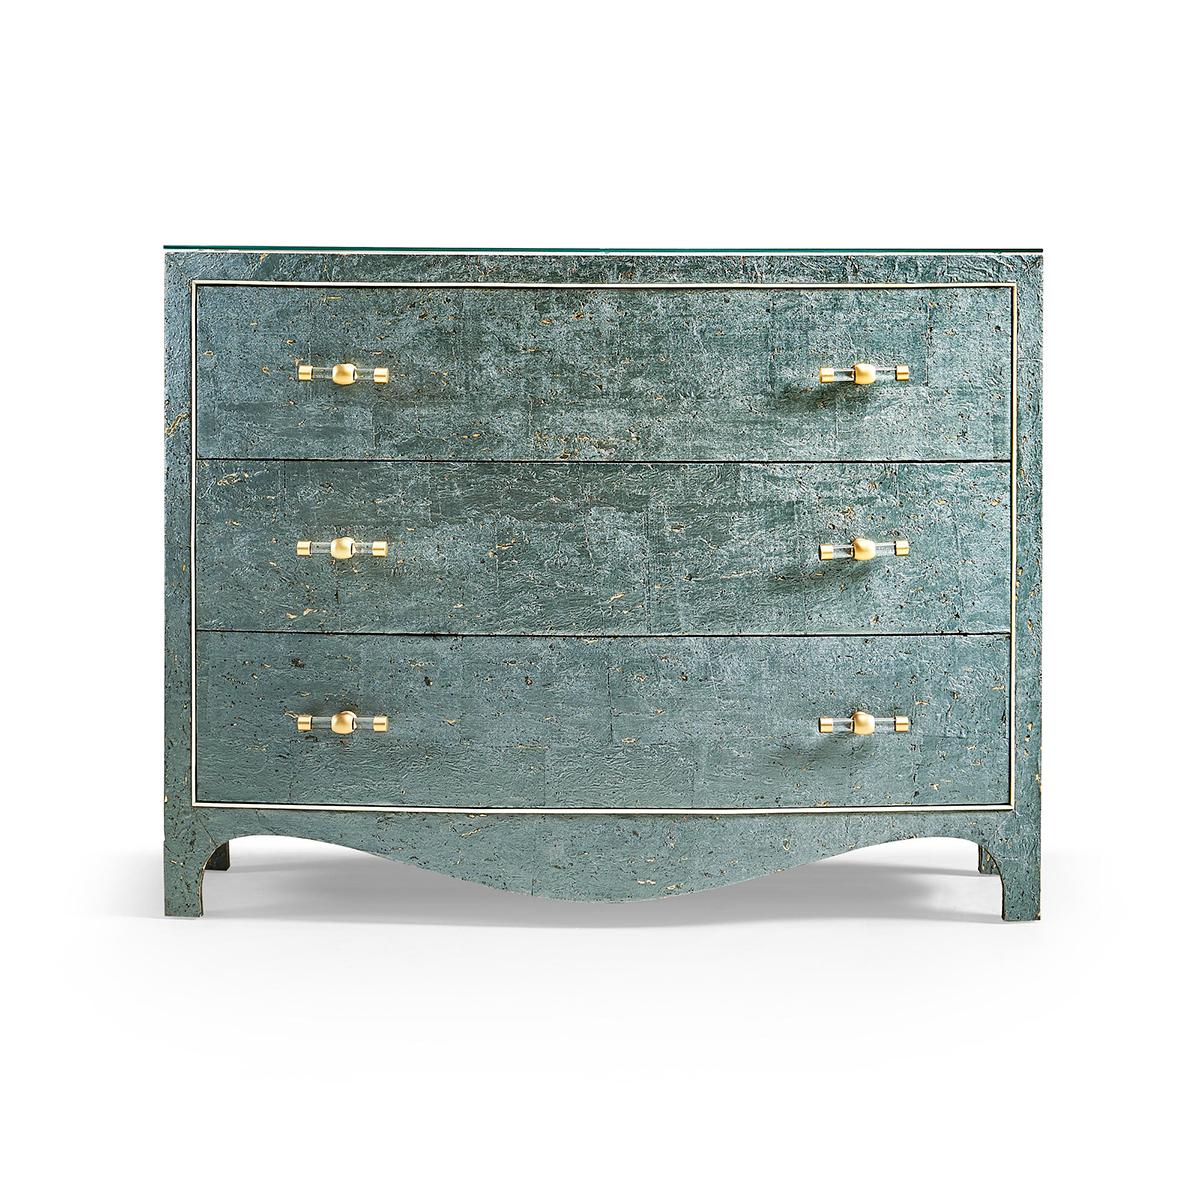 This unique piece showcases a dynamic teal cork wallpaper finish speckled with golden flecks, creating a textural delight that mimics the serene beauty of sea foam. A sleek, recessed glass top provides a stable and stylish surface for lamps, books,